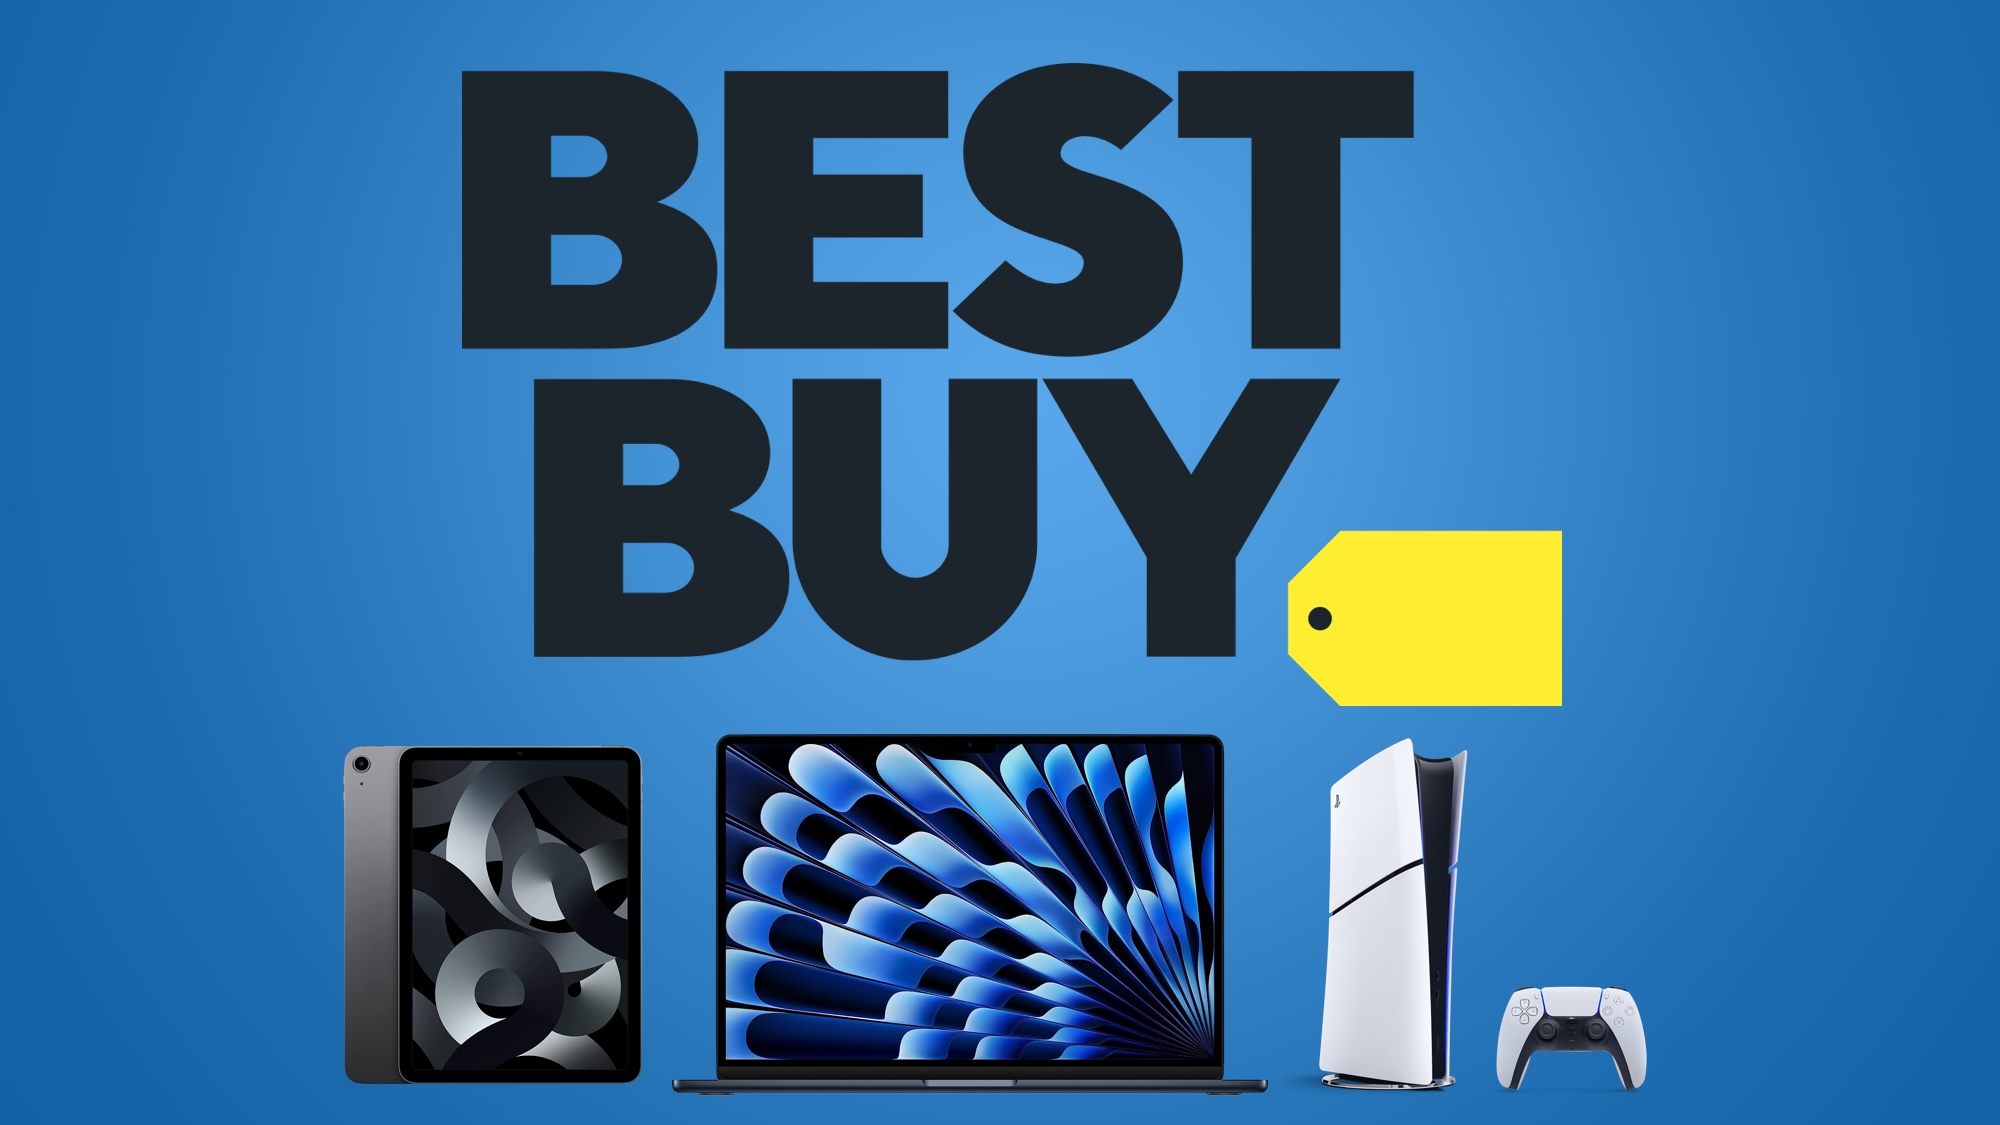 Best Buy's New Sitewide Sale Has Record Low Prices on iPads and MacBooks, Plus $50 Off PlayStation 5